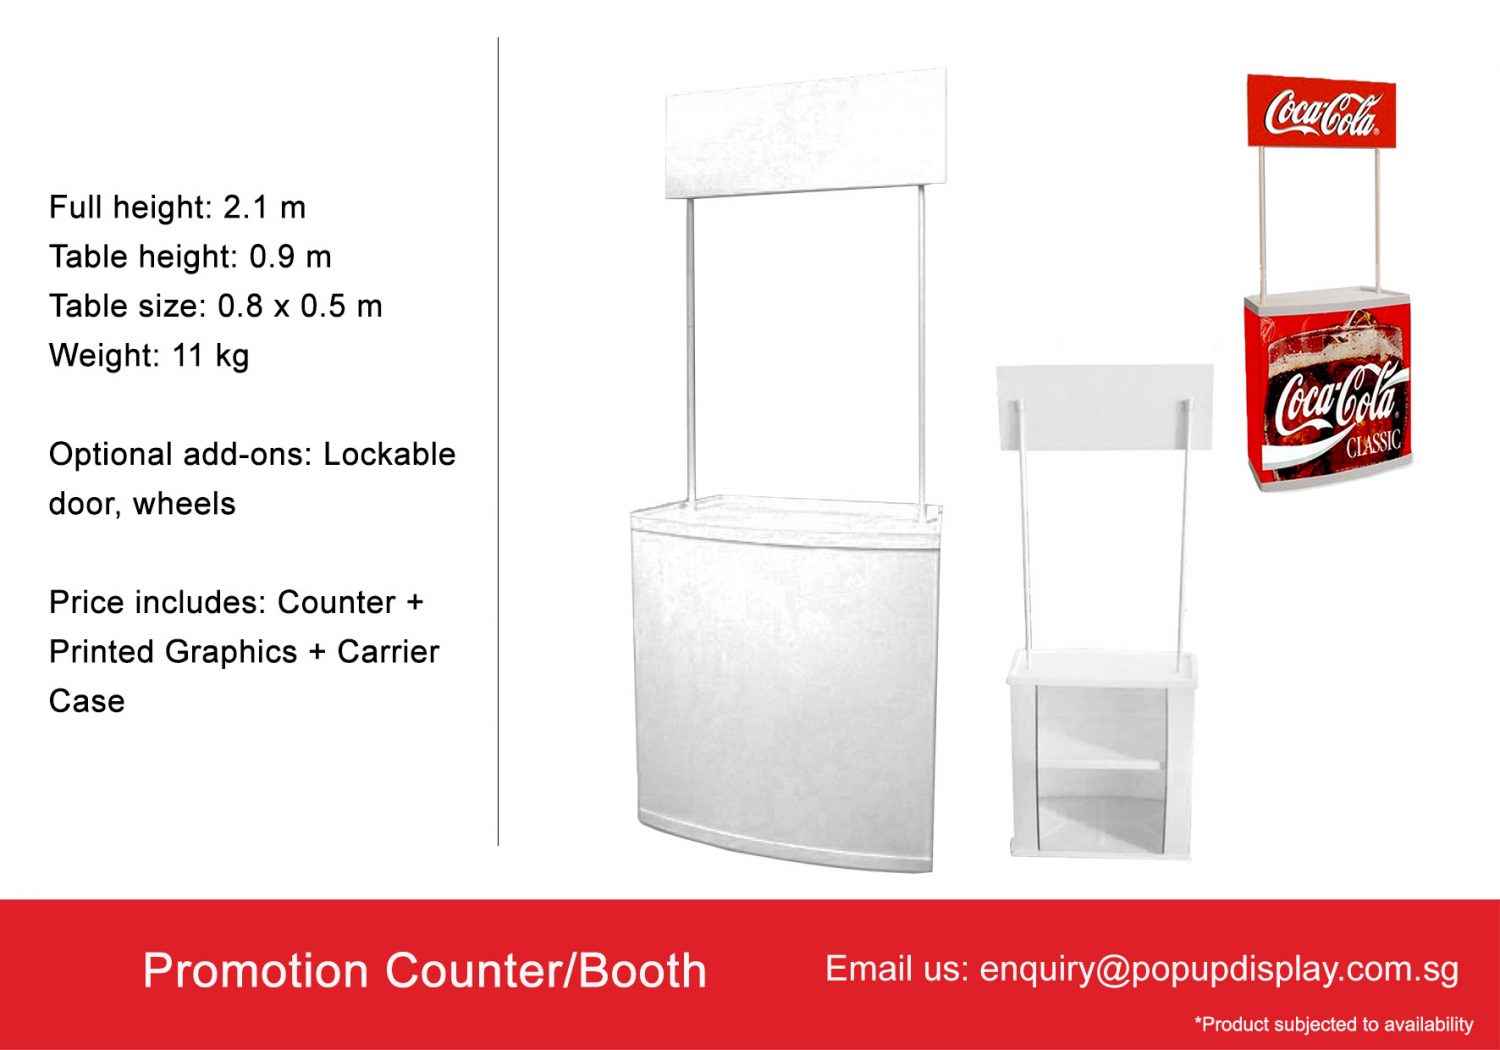 Promotion Counter